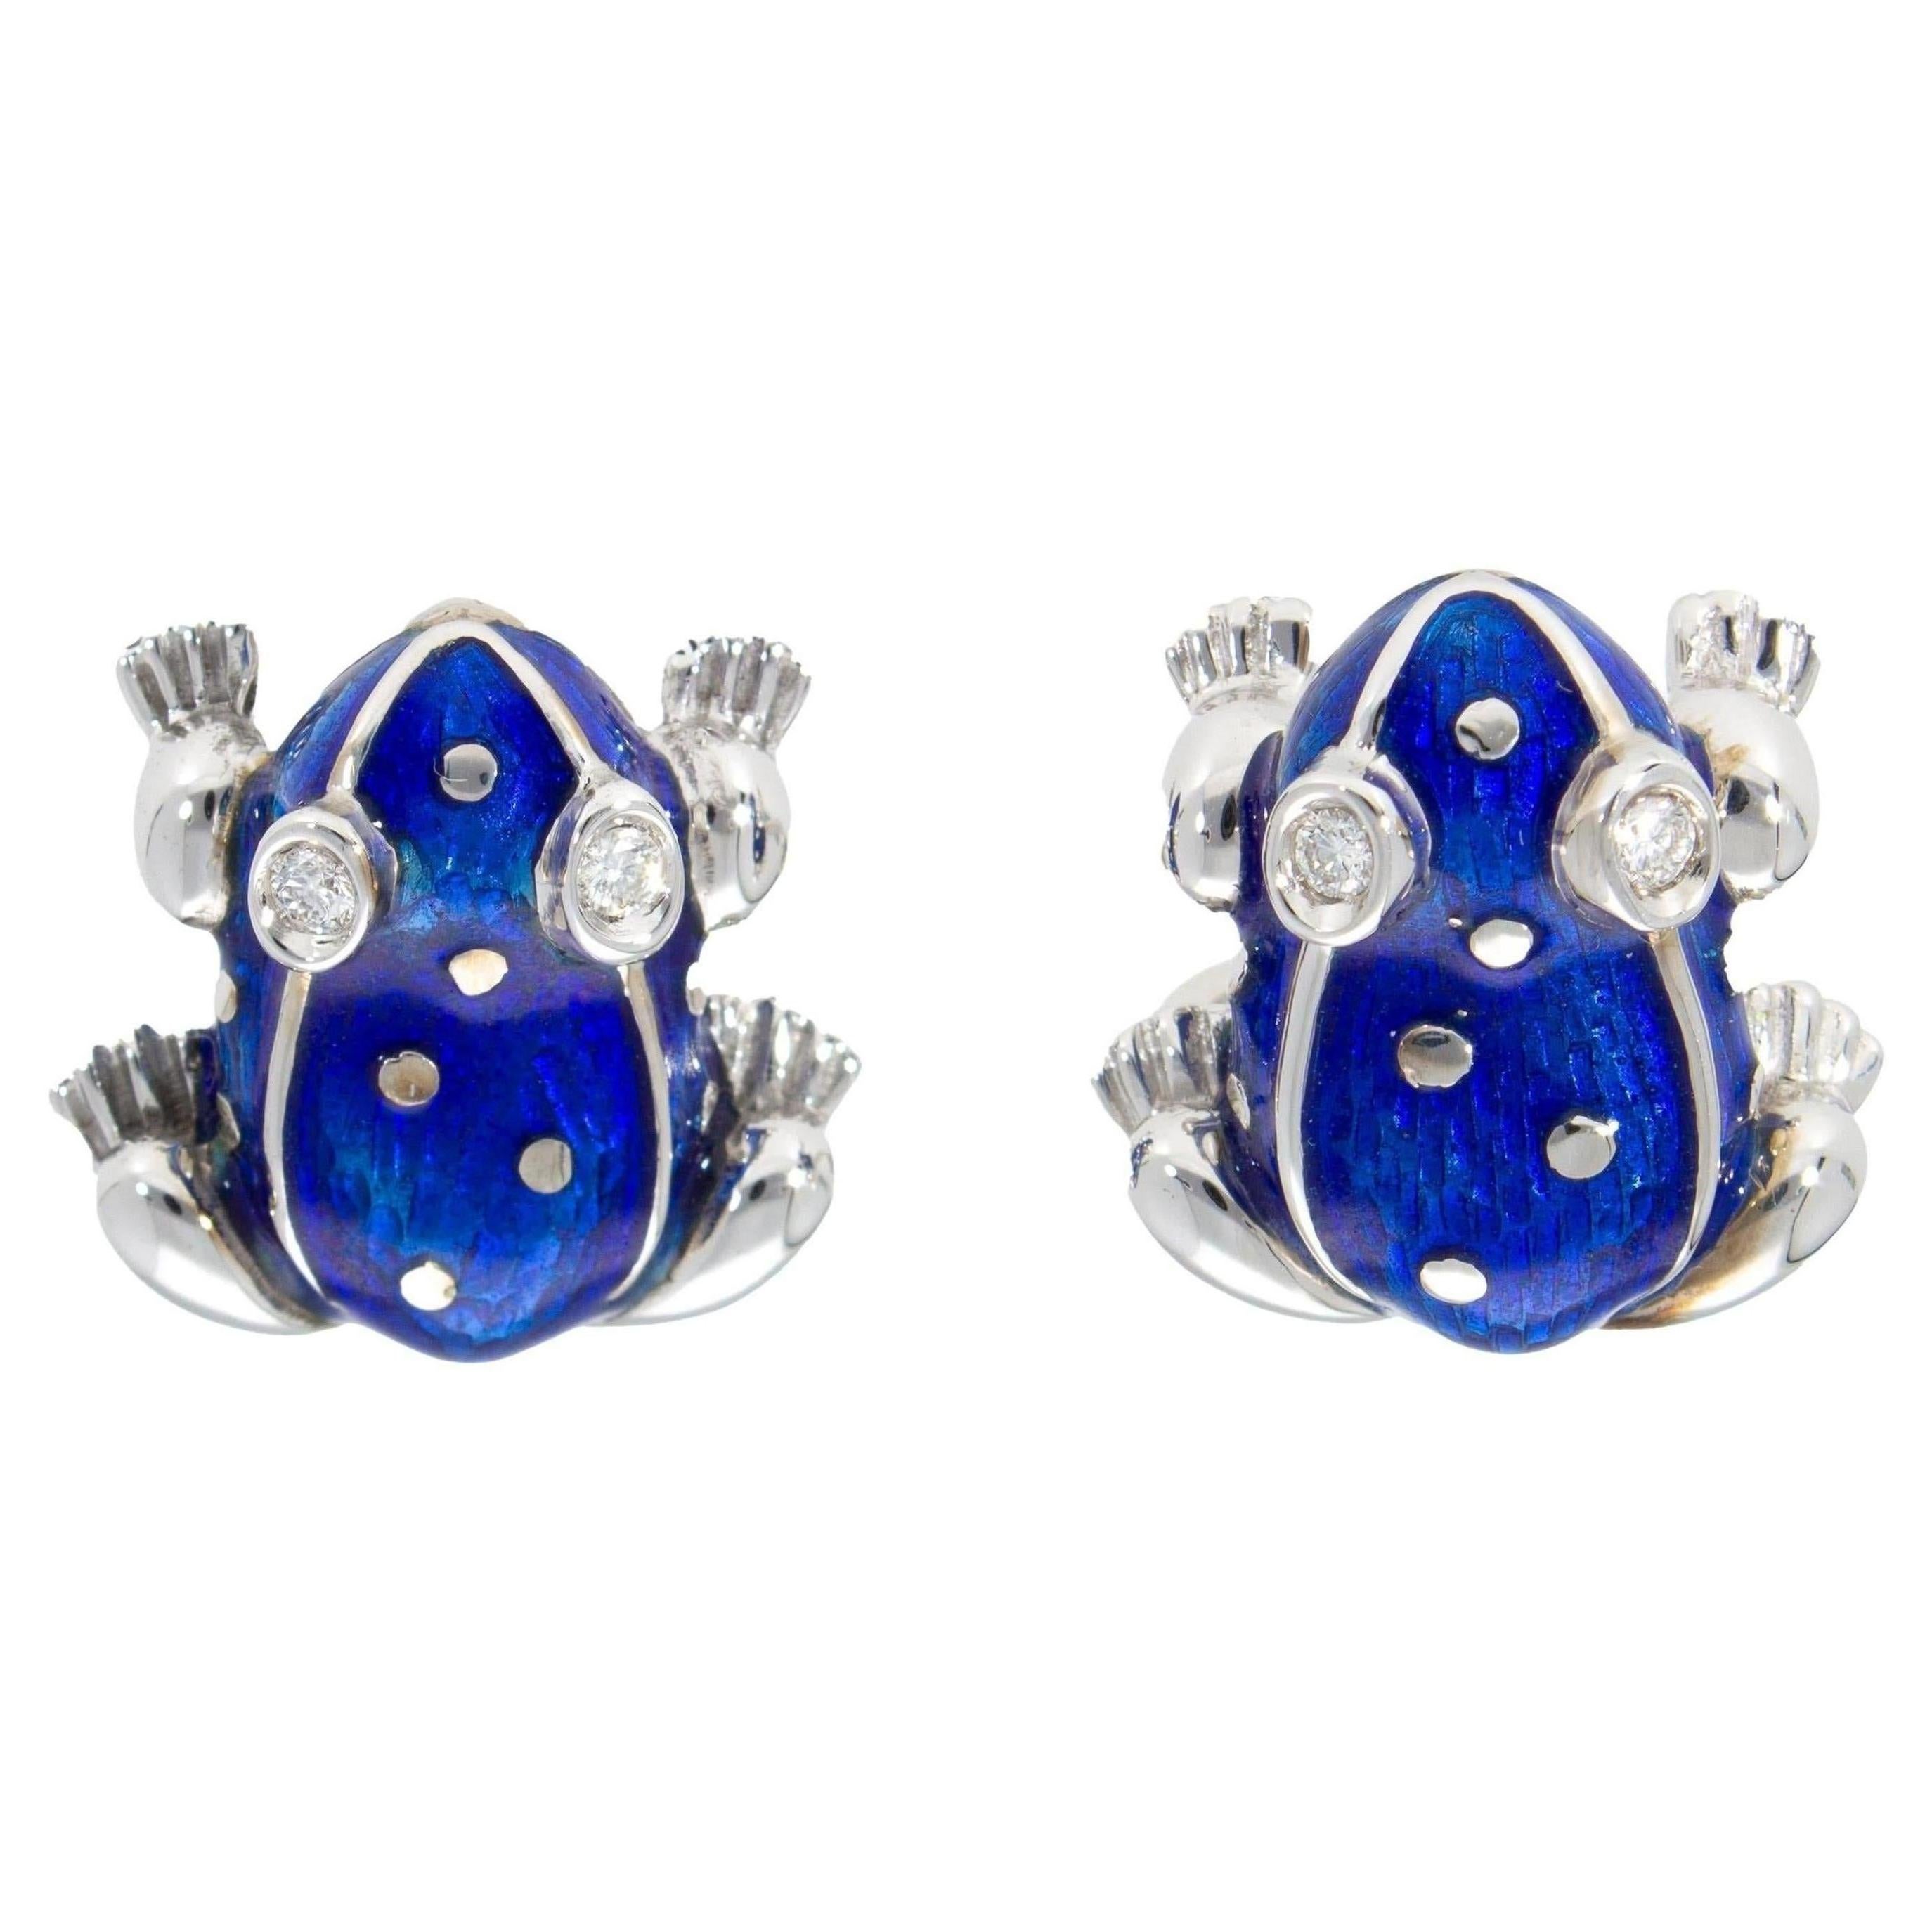 18 Kt White Gold with Blu Enamel Diamonds Frog Cufflinks Handcraft Made in Italy